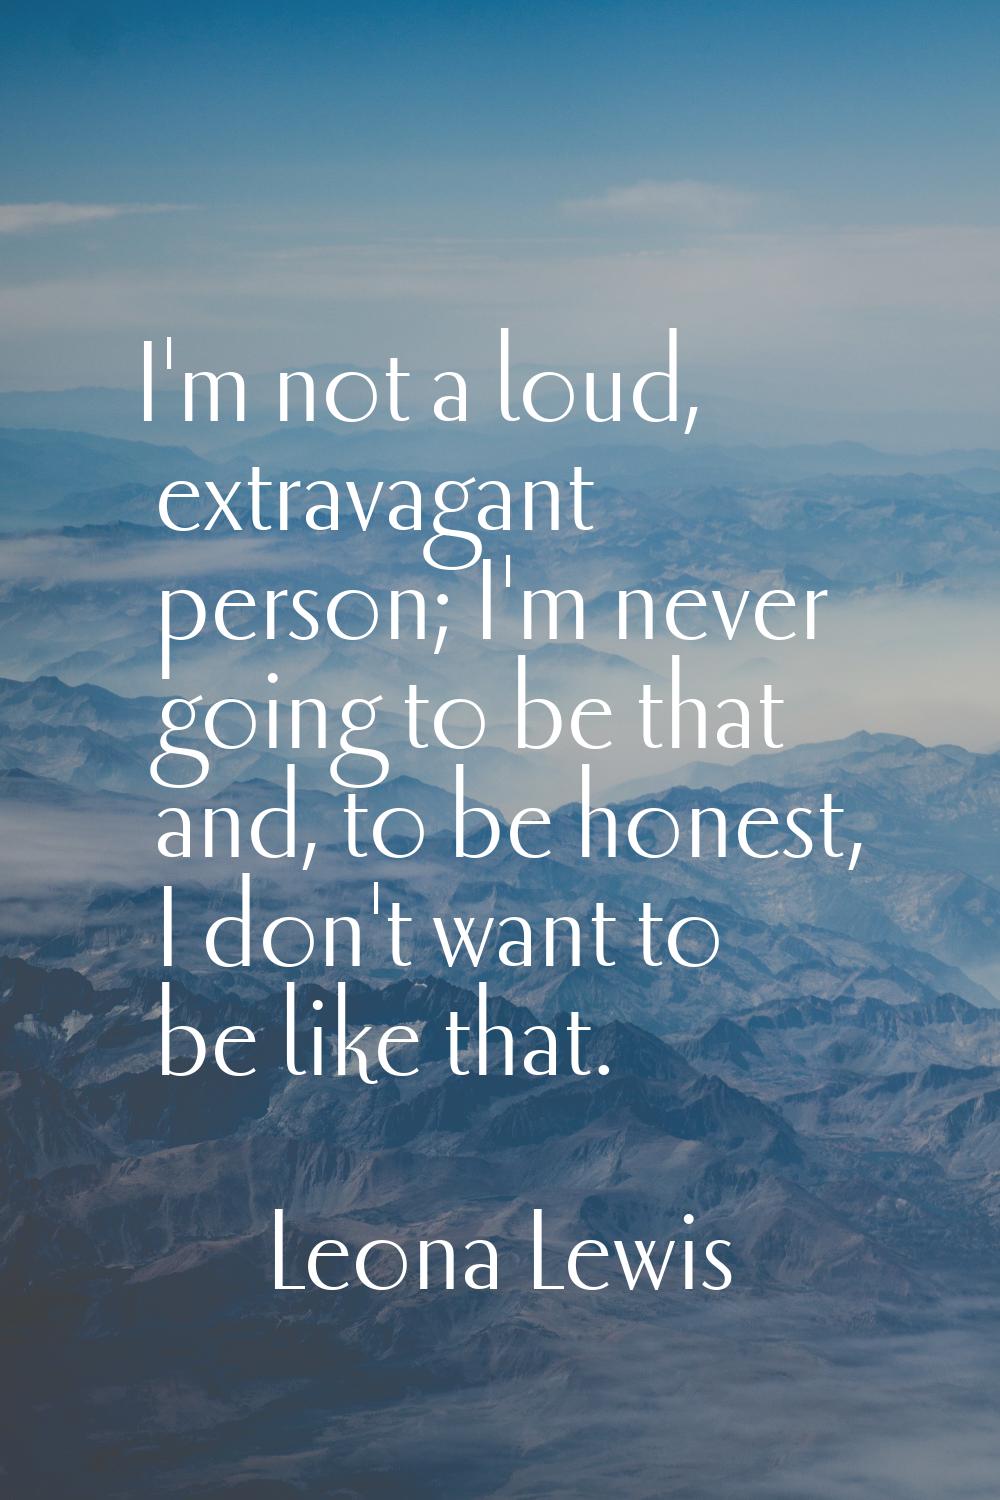 I'm not a loud, extravagant person; I'm never going to be that and, to be honest, I don't want to b